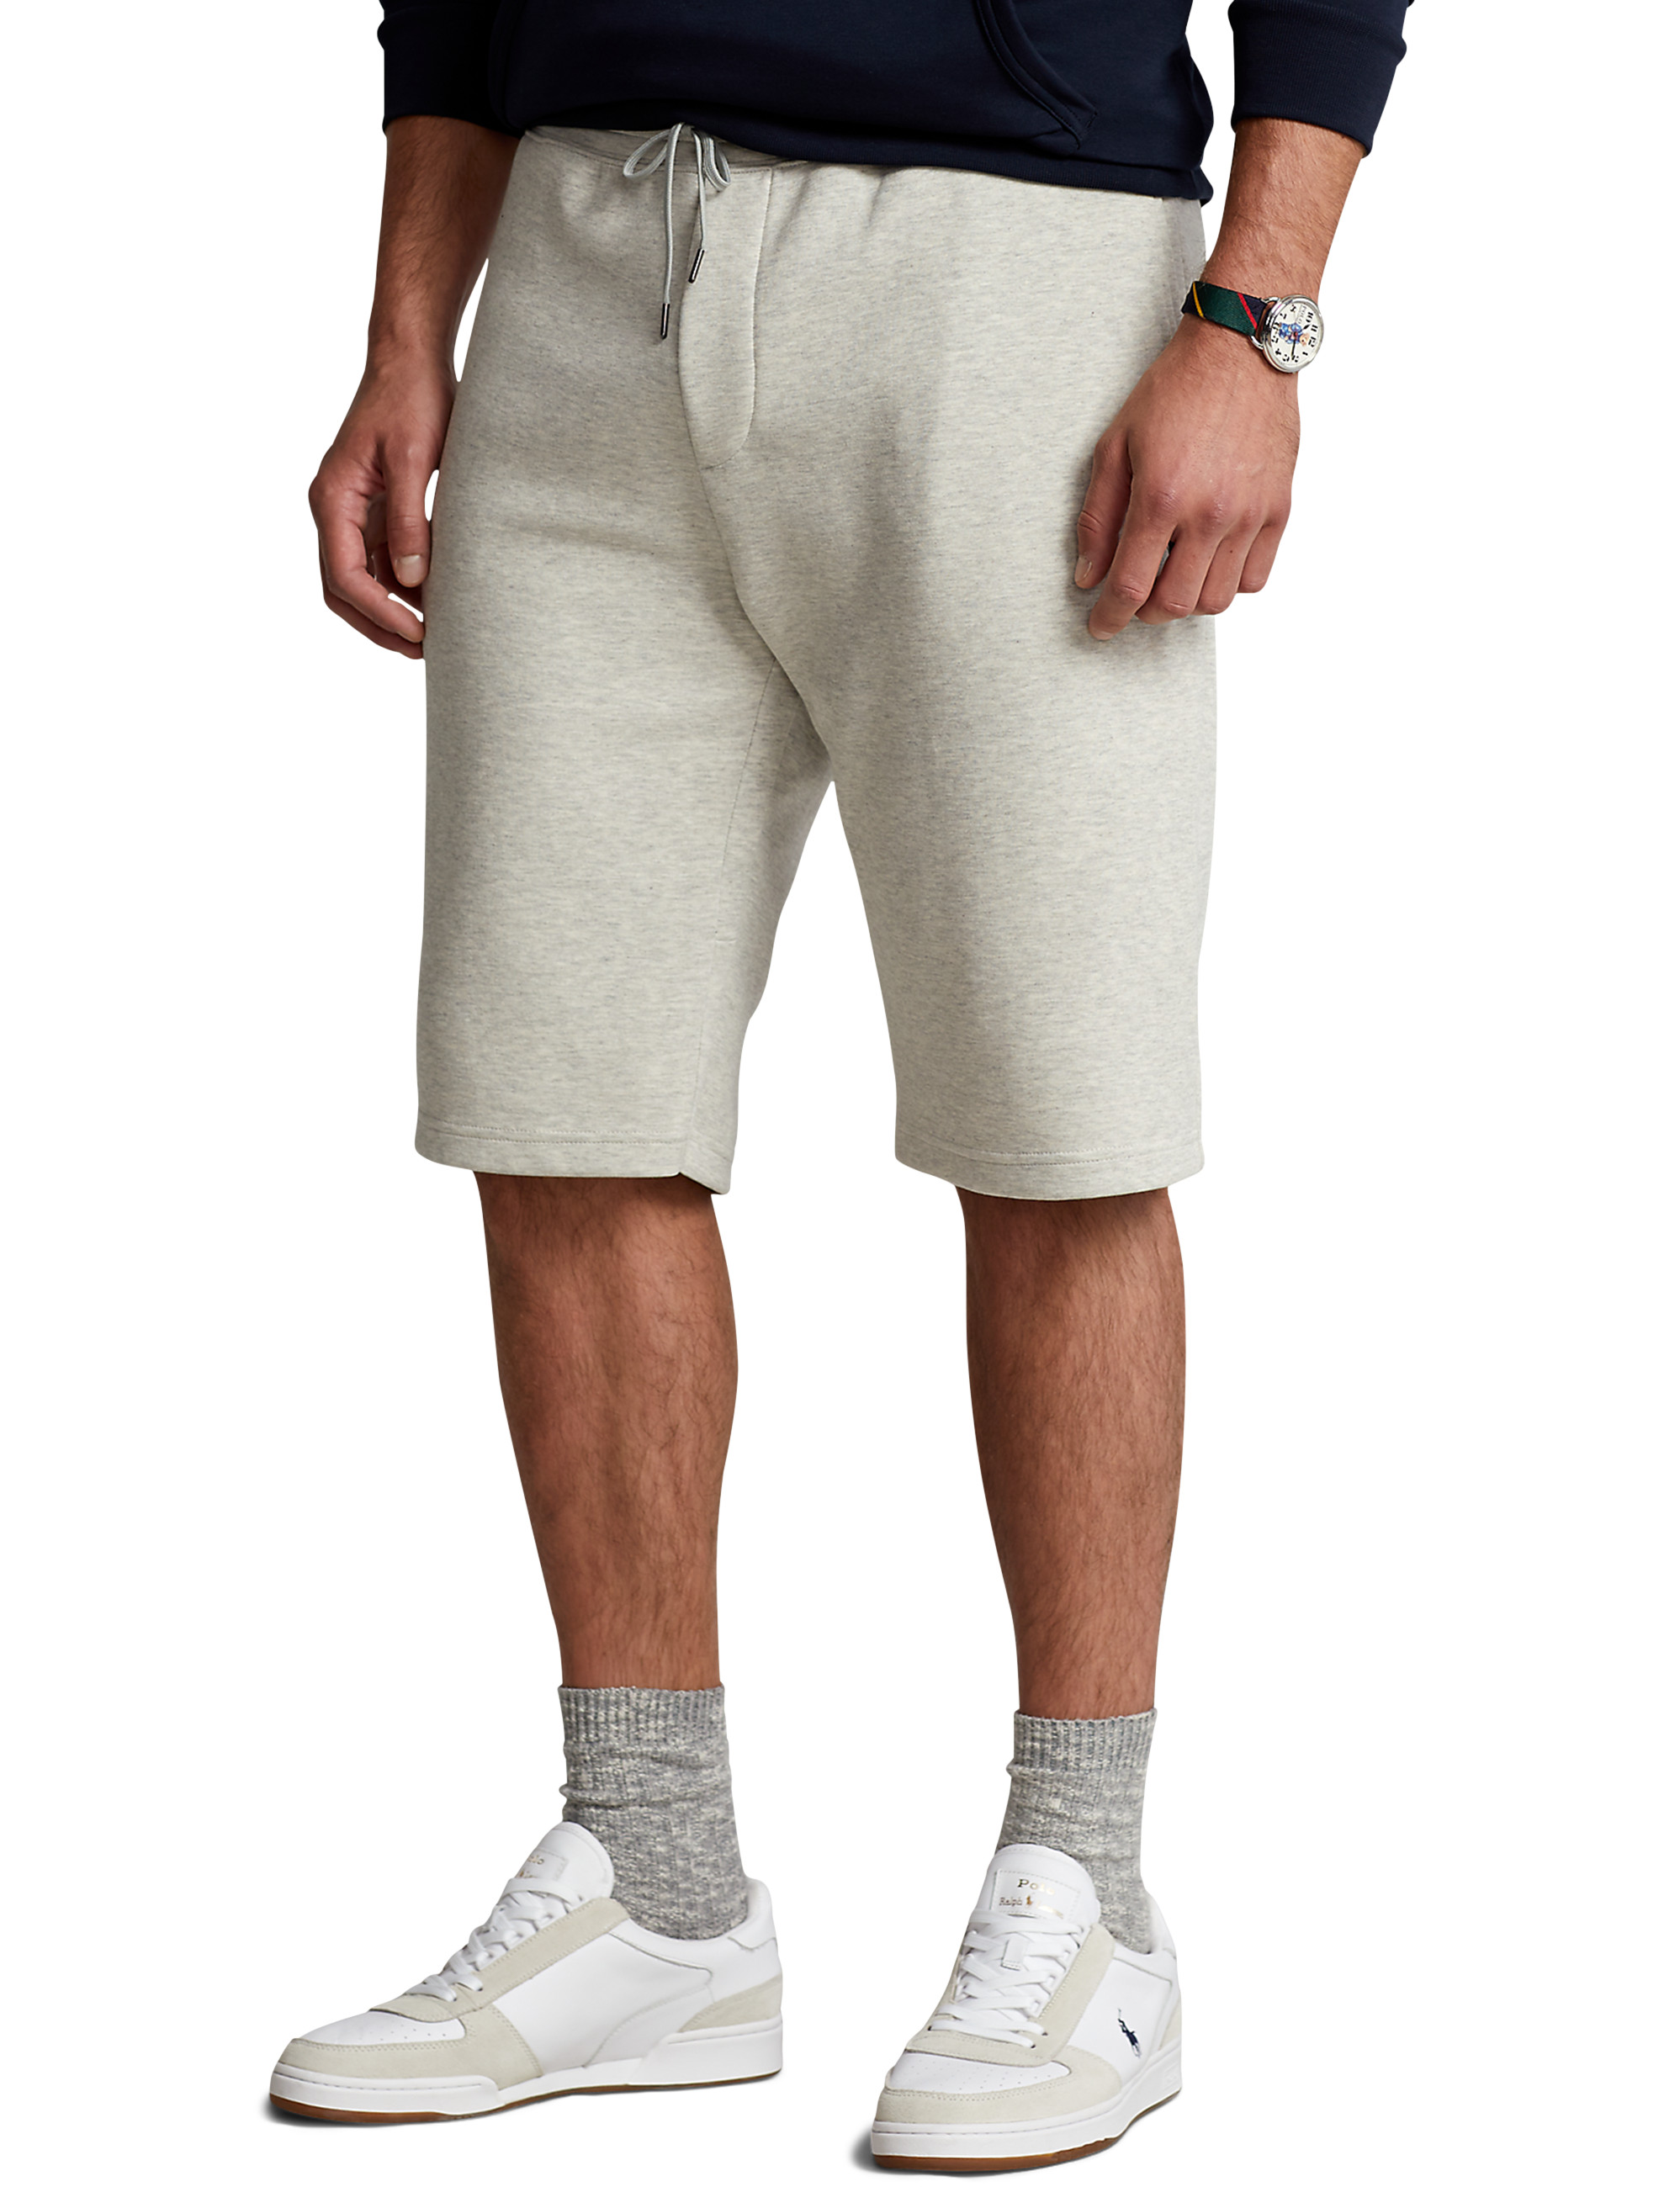 Big and Tall | Polo Ralph Lauren Double-Knit Active Shorts | DXL